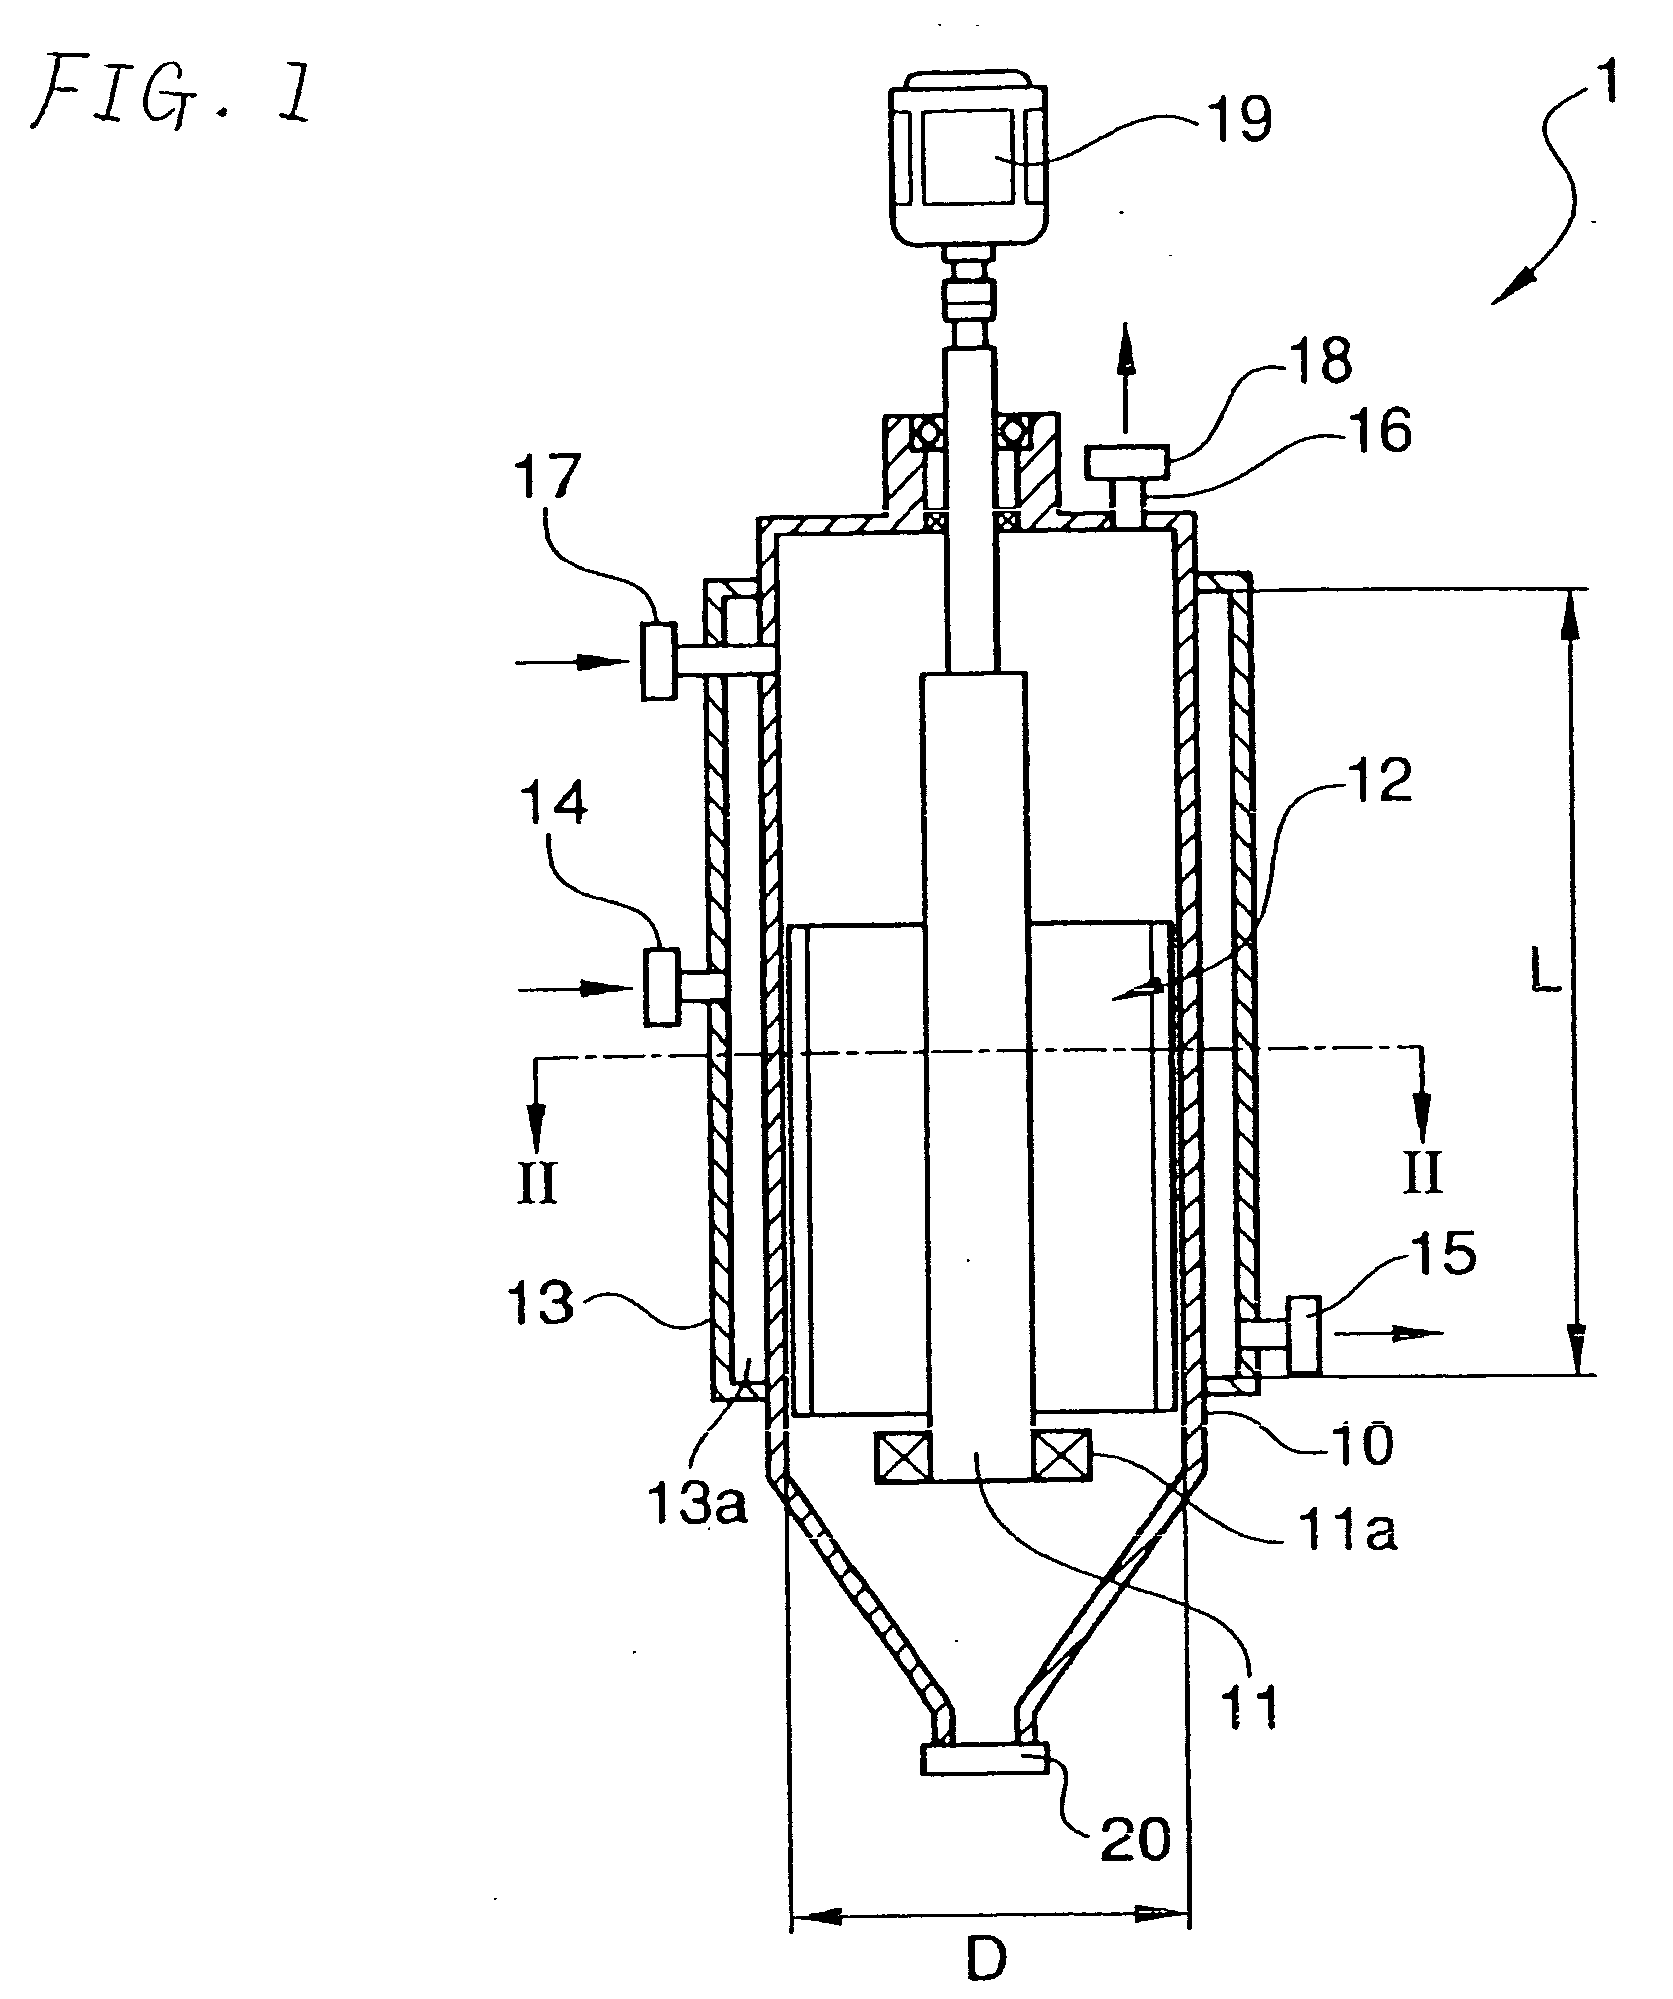 Thin film evaporating concentrator, method of evaporating and solidifying photographic waste solution, and reuse method of photographic waste solution